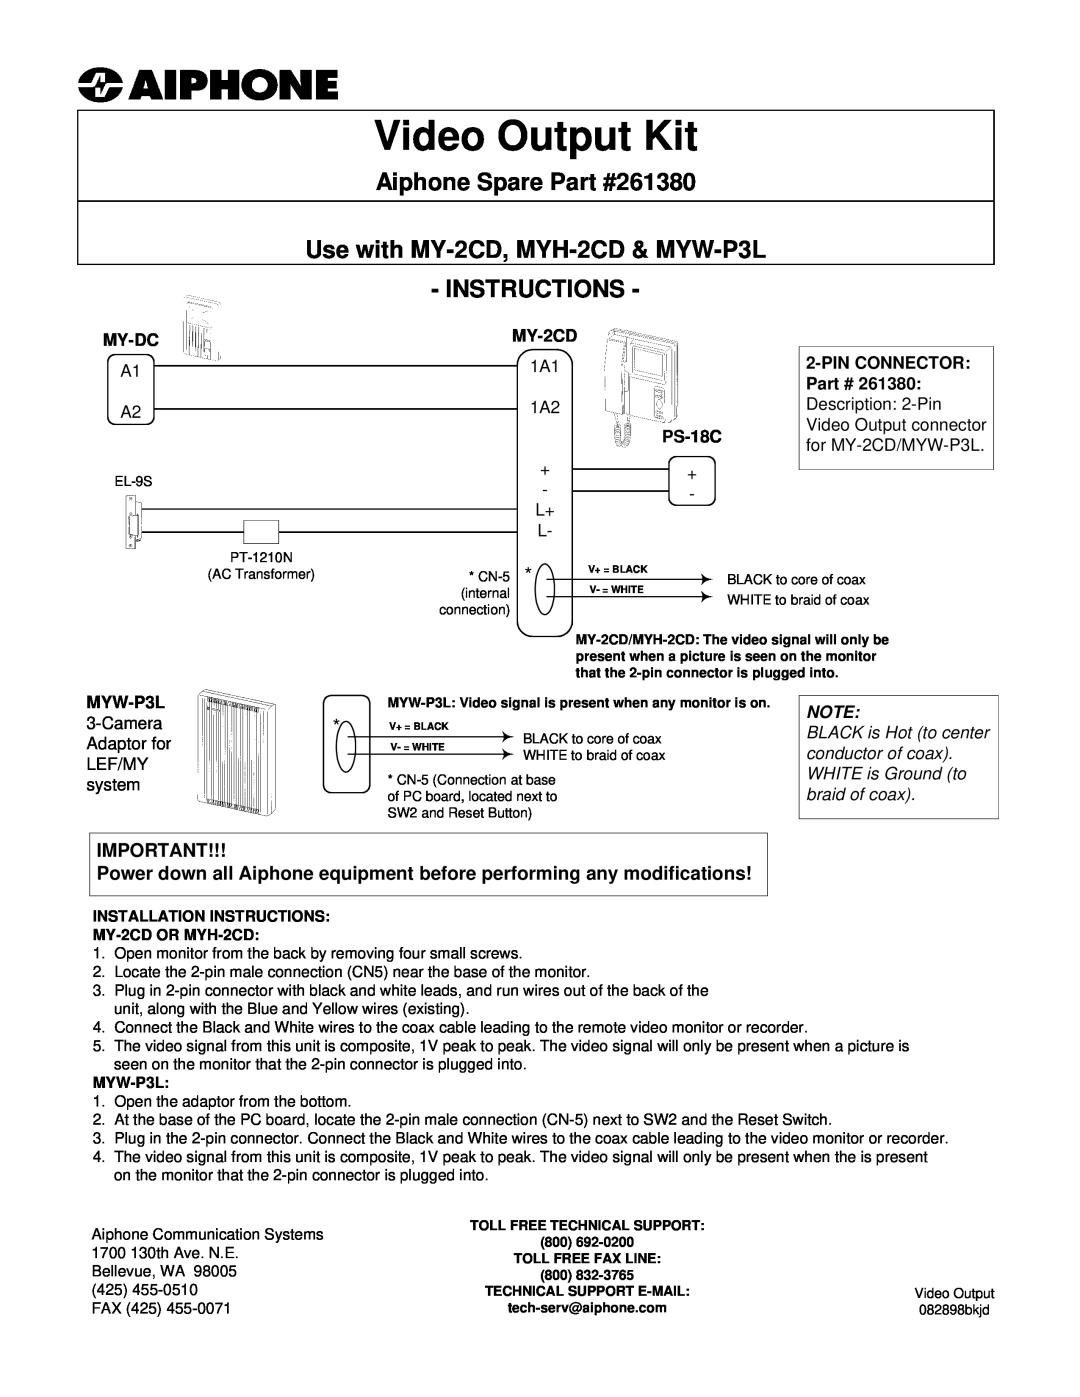 Aiphone 261380 installation instructions Video Output Kit, Aiphone Spare, Use with MY-2CD, MYH-2CD& MYW-P3L INSTRUCTIONS 